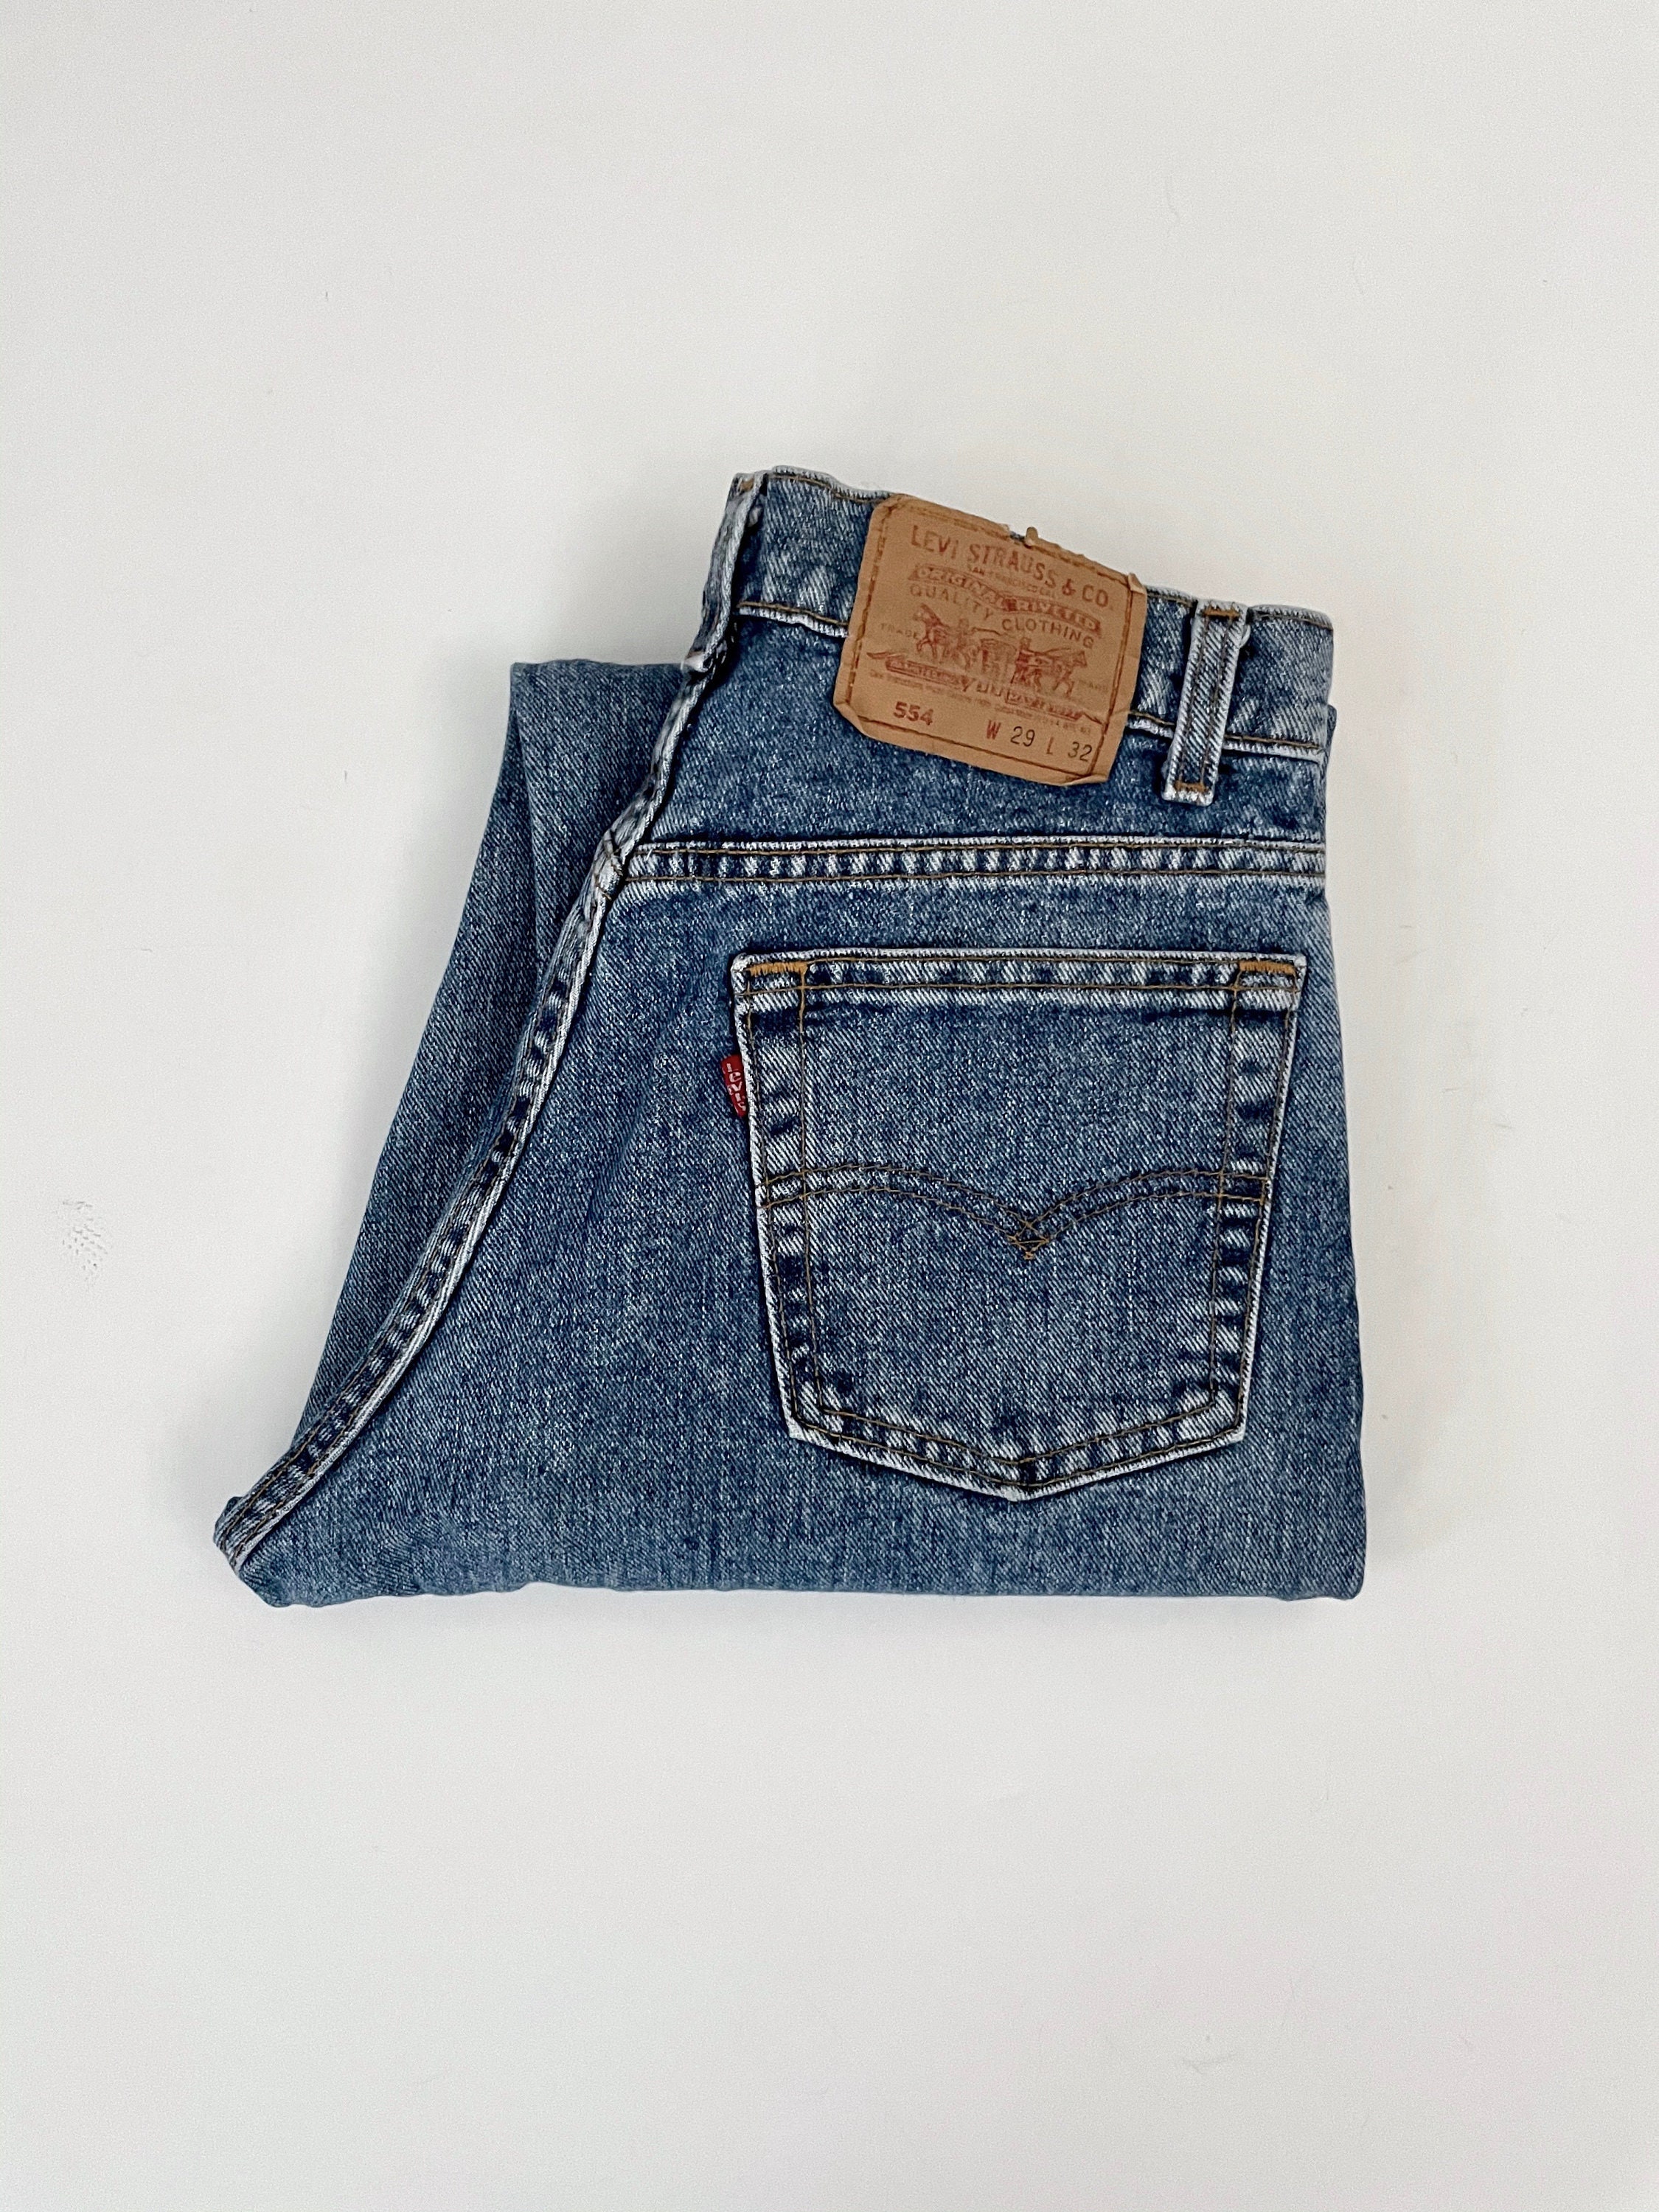 Vintage 80's Levi's 554 Jeans USA Relaxed Fit Denim - Etsy